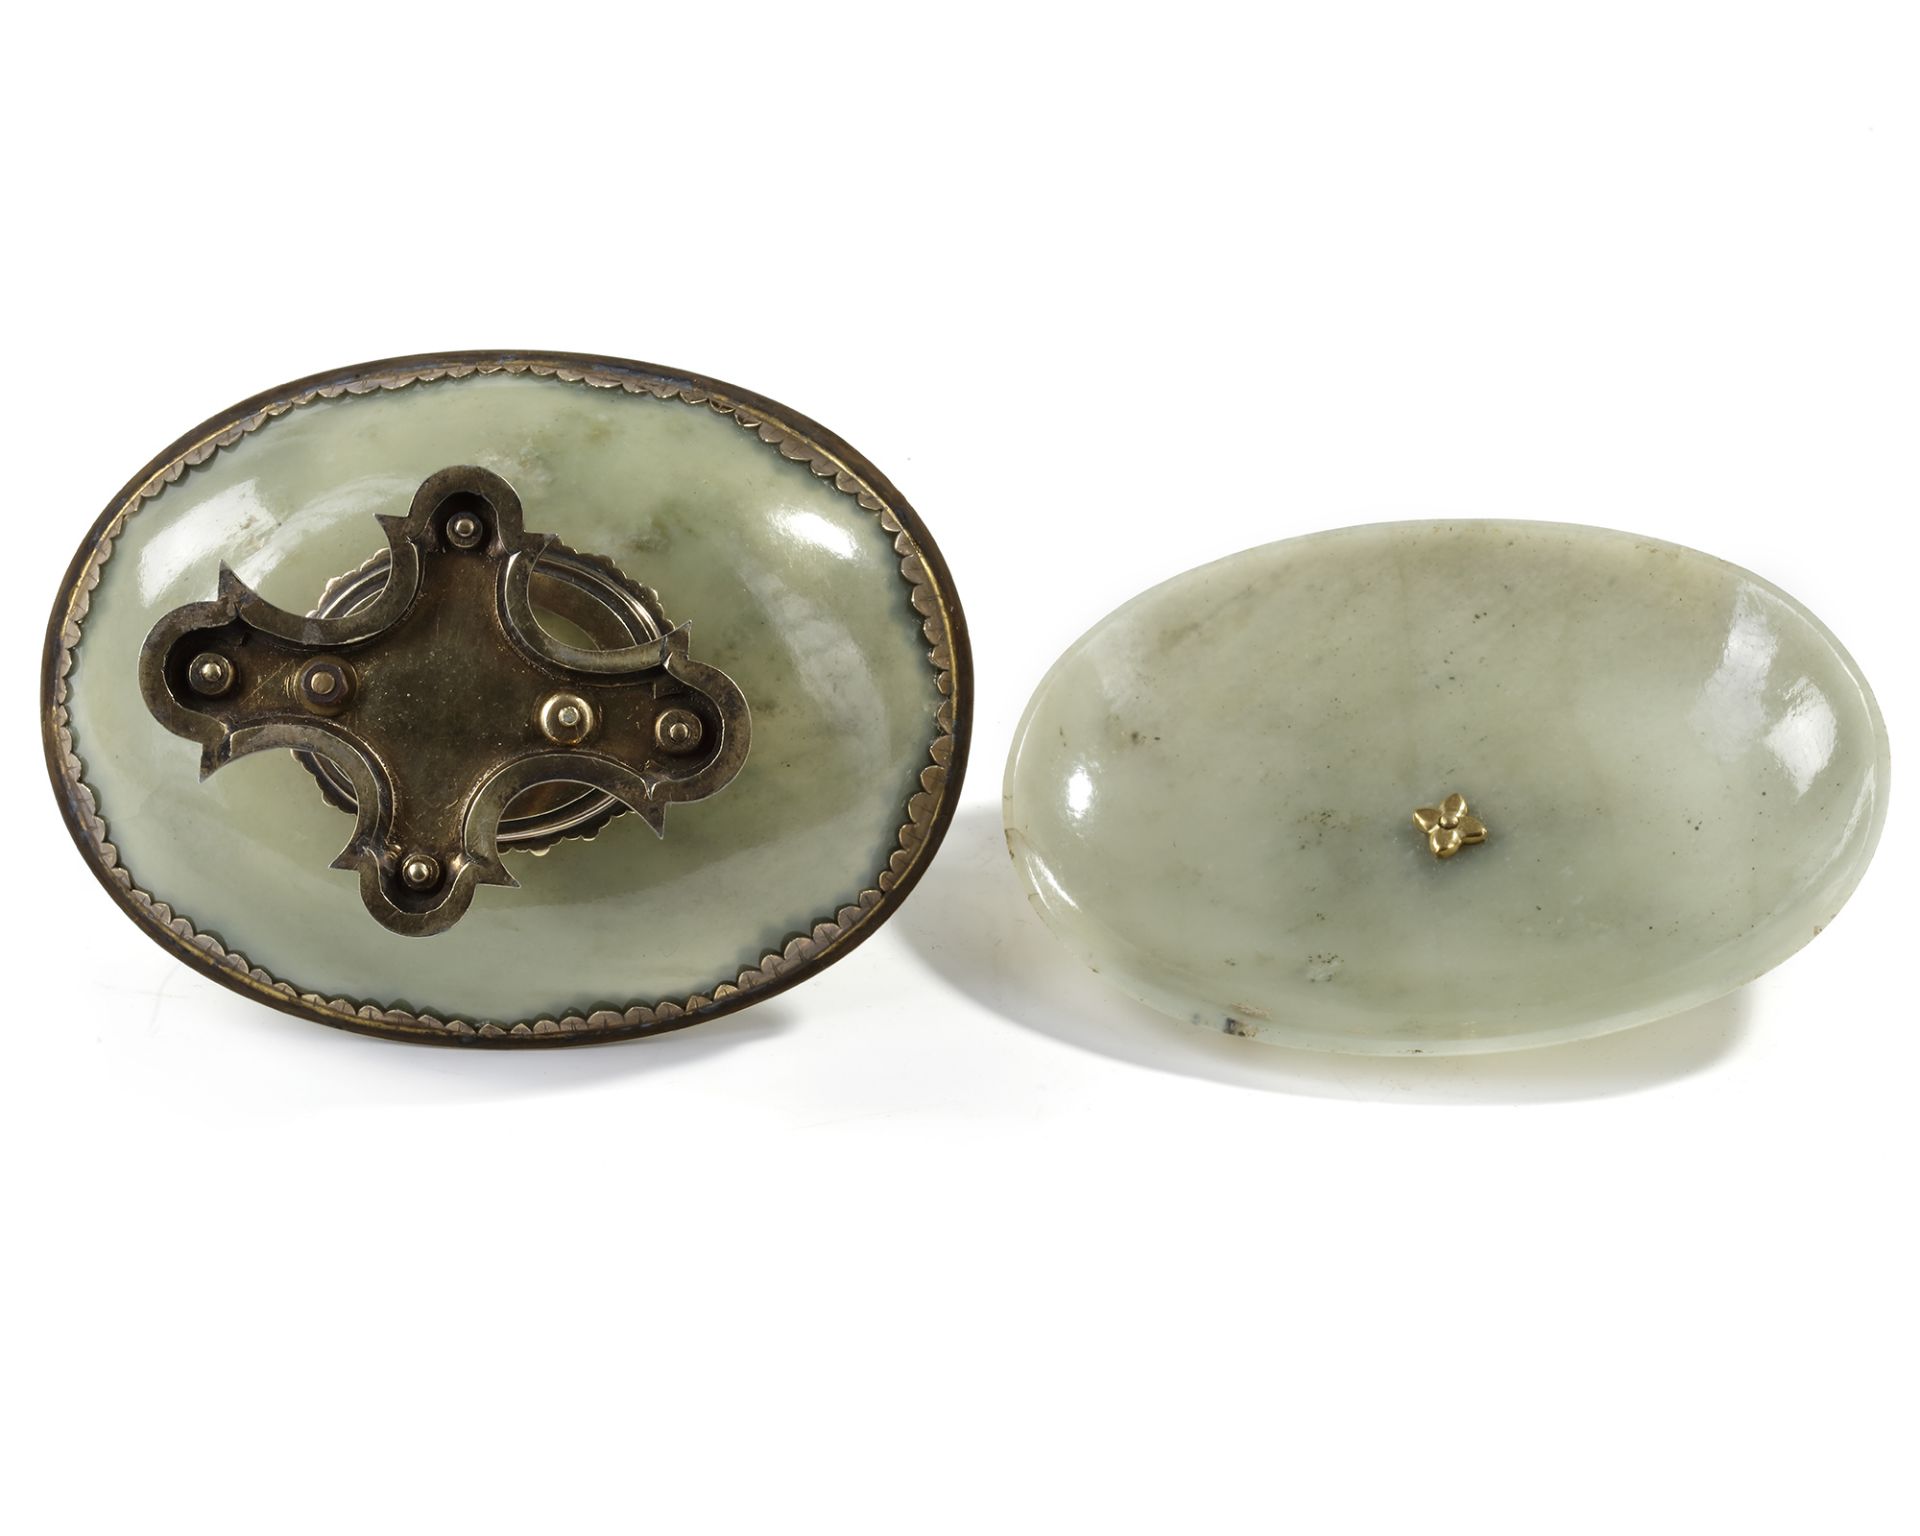 A MUGHAL JADE BOWL AND COVER, 18TH CENTURY - Image 4 of 4